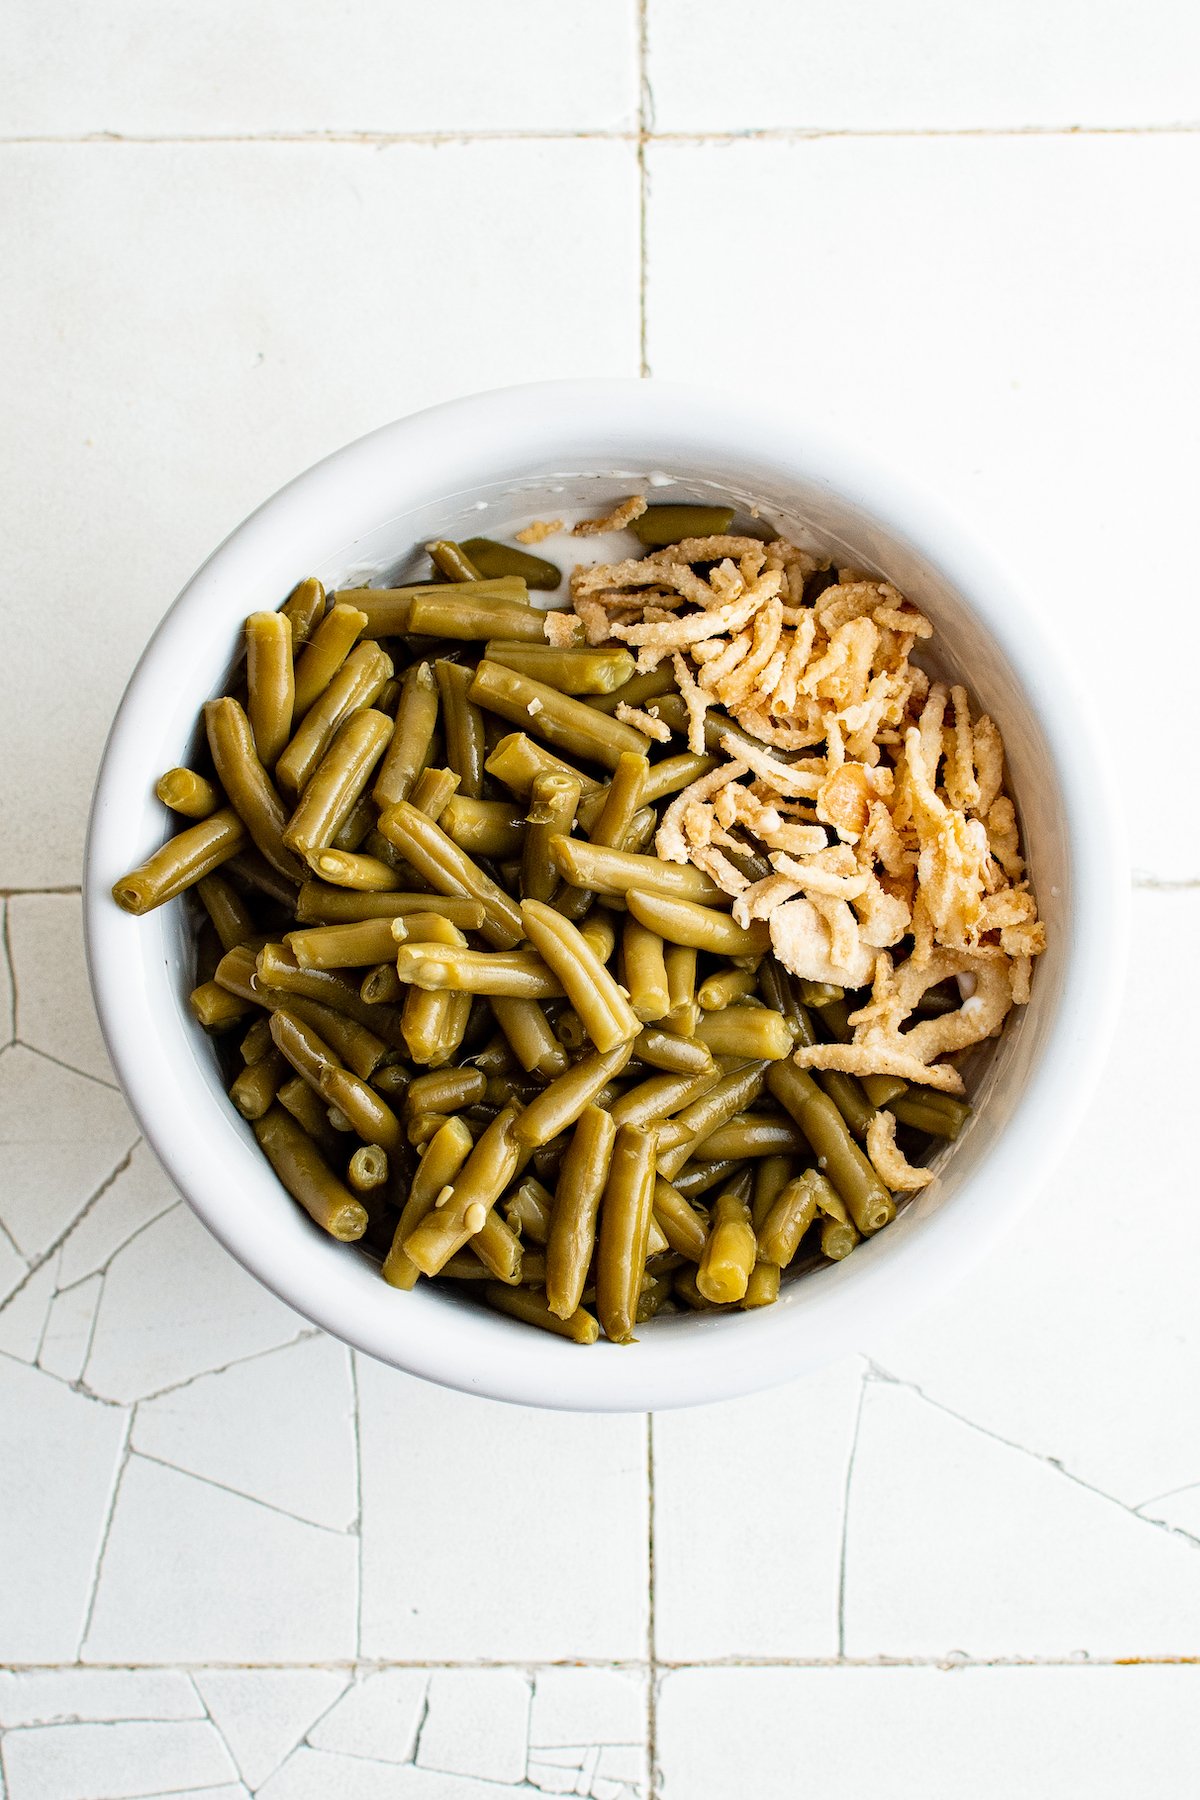 Green beans and fried onions in a mixing bowl with mushroom sauce.